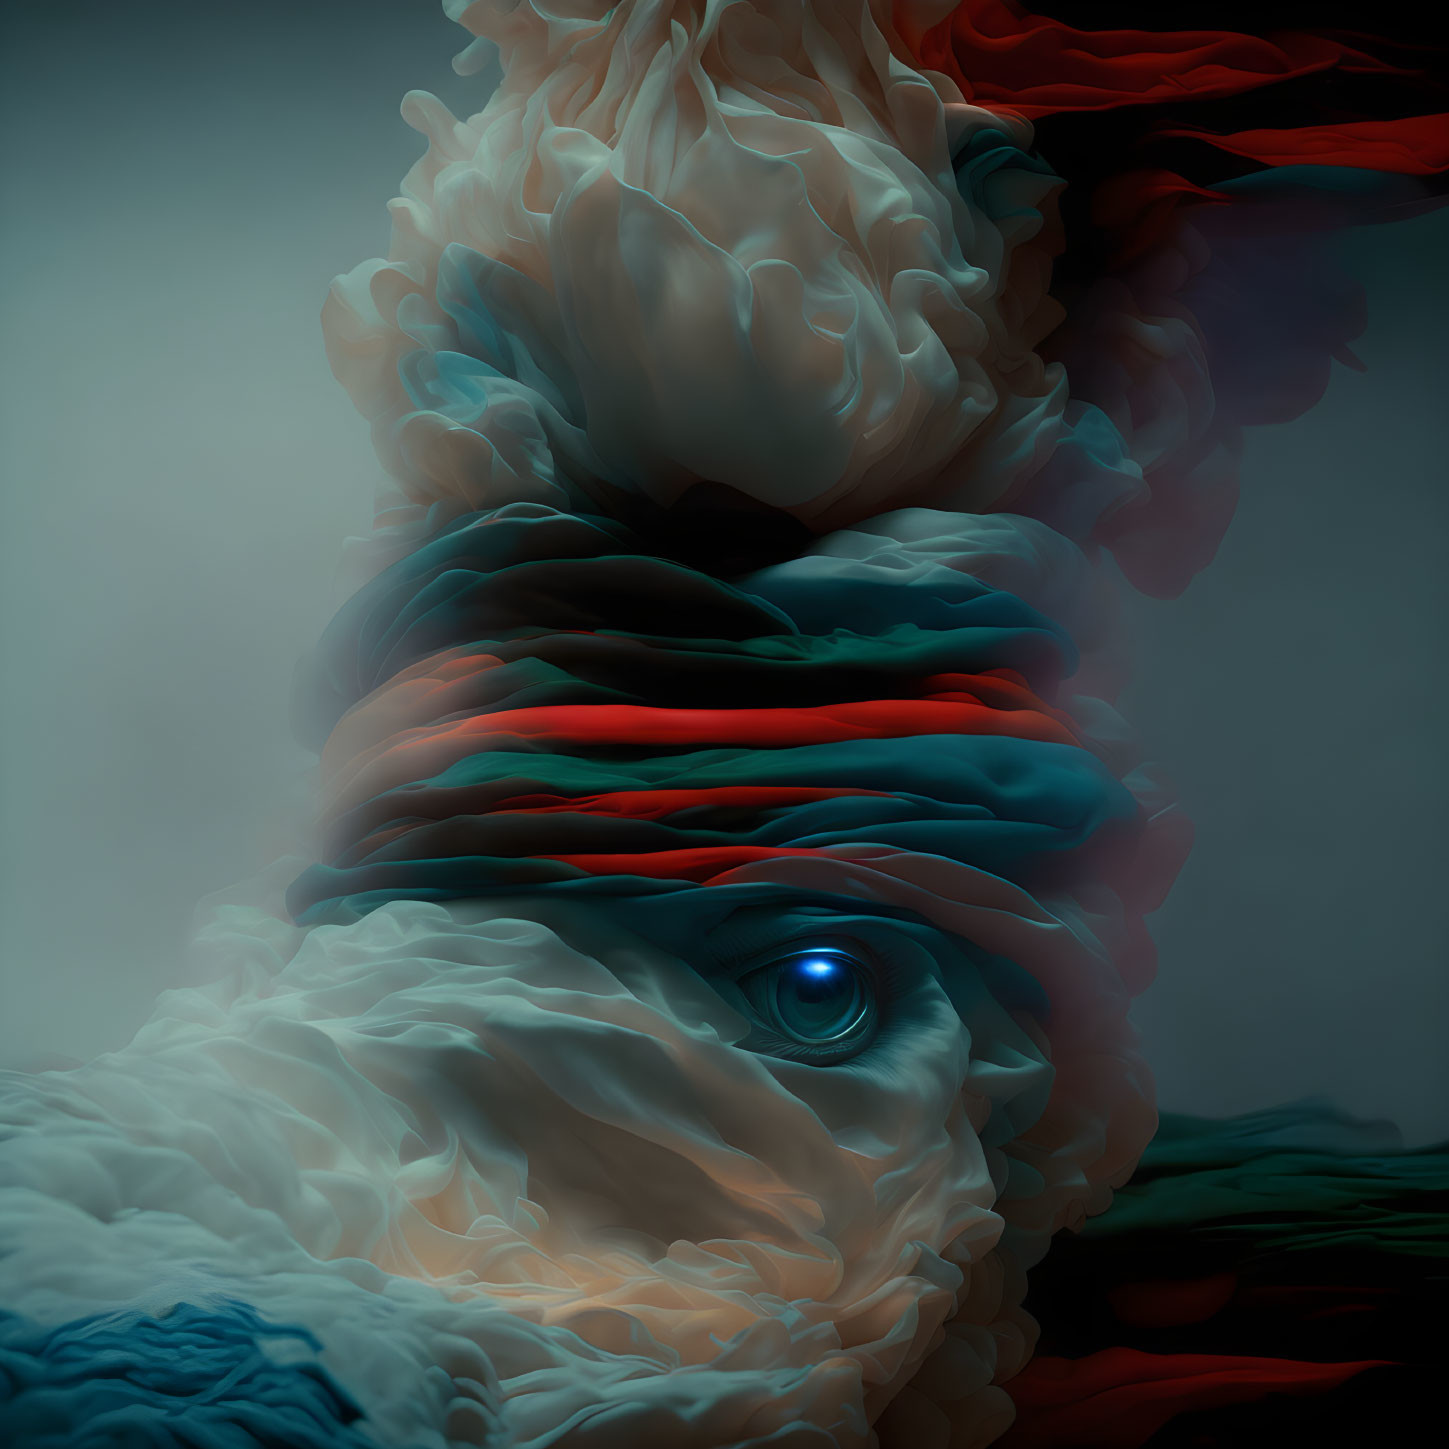 Abstract swirling textures in red, teal, cream colors with a singular blue eye.